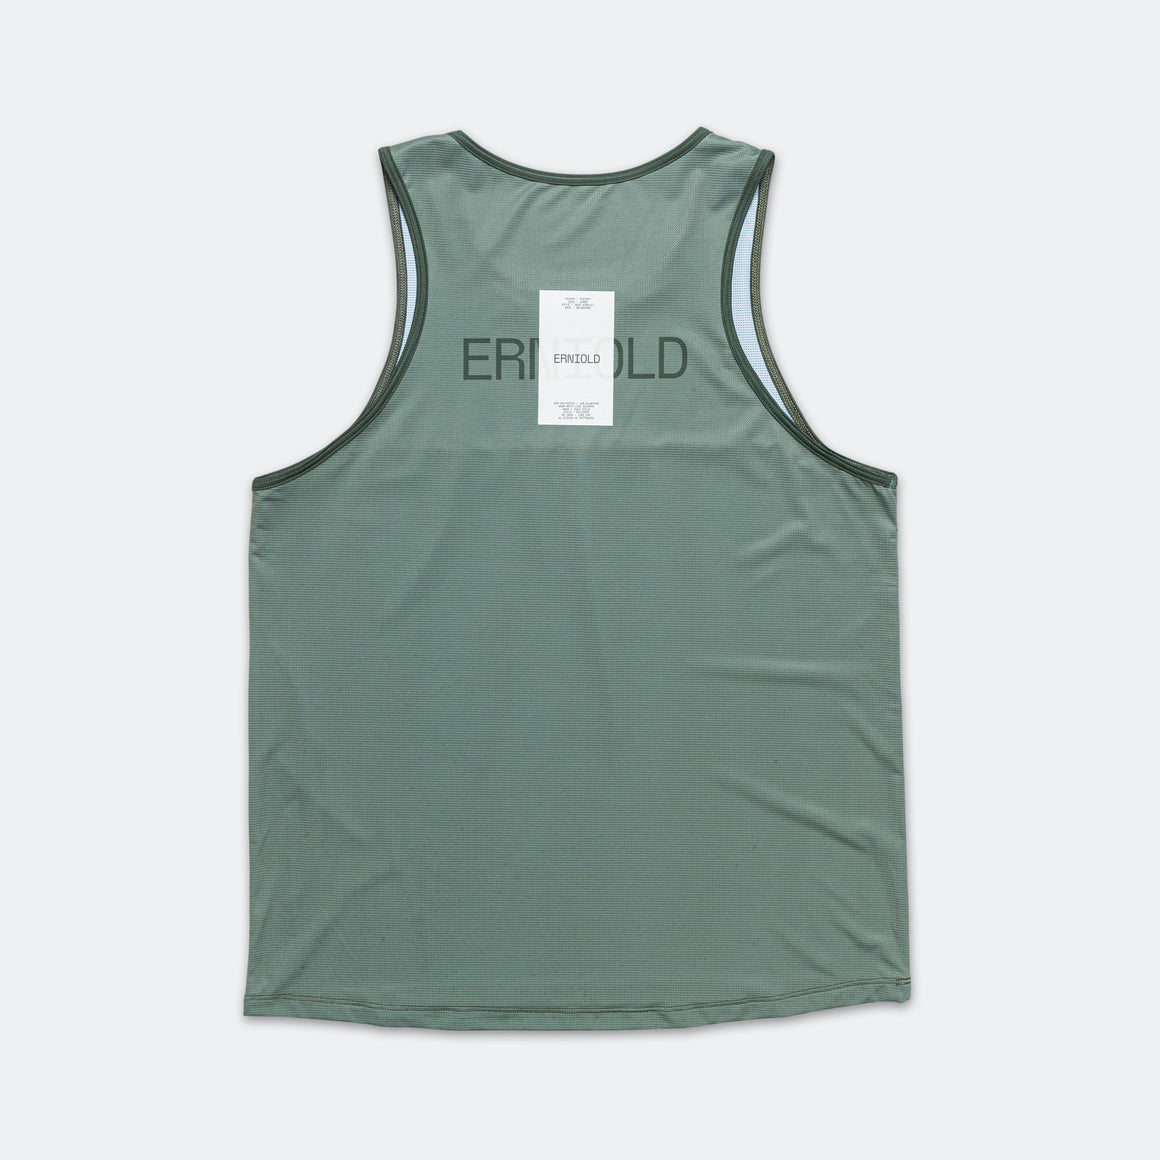 Erniold - Mens Race Singlet - Dark Moss - Up There Athletics